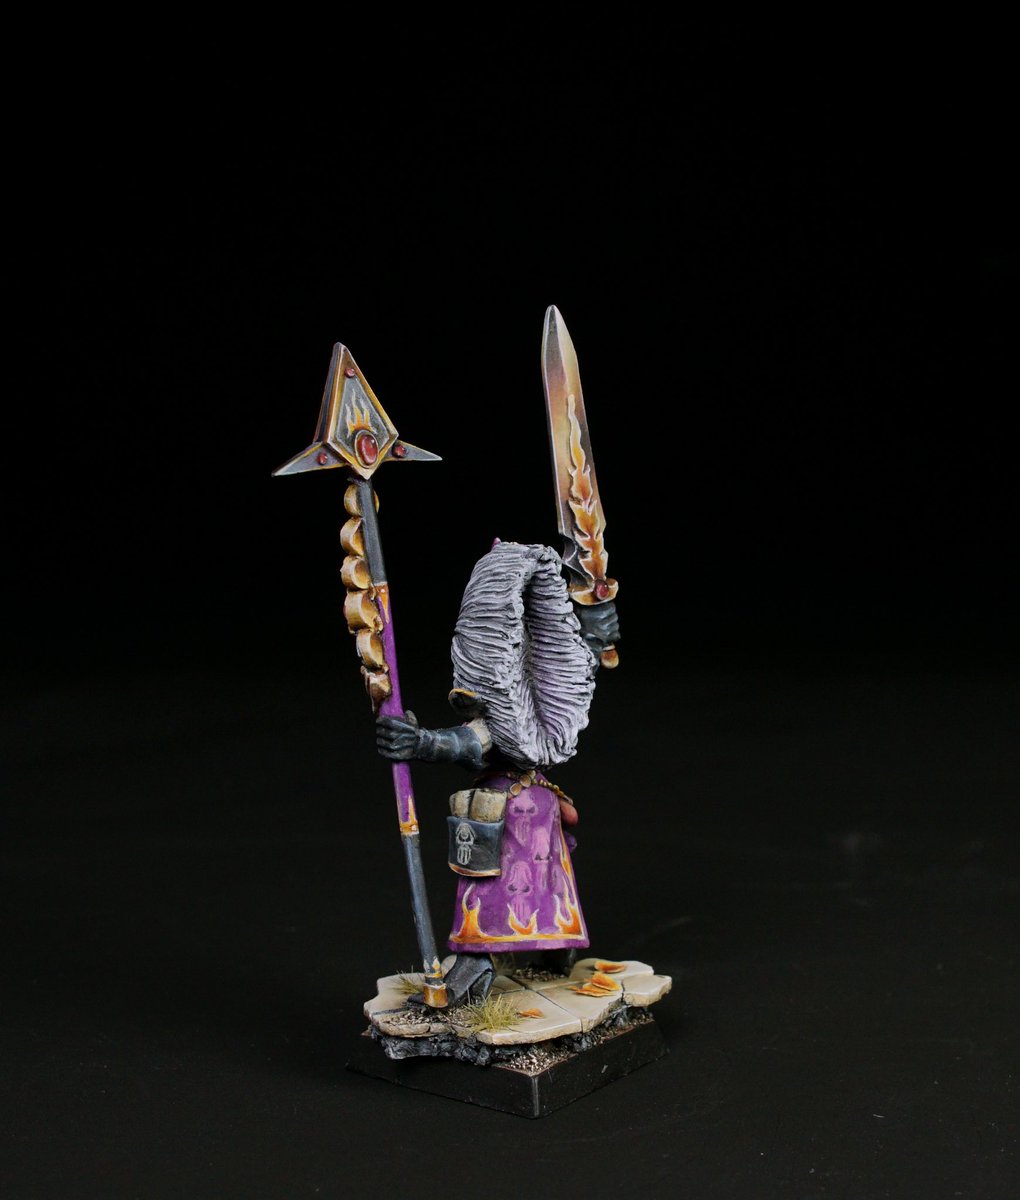 And here some final high quality pictures of my painted unreleased Dark Elf Sorceress #1 . #warhammercommunity #oldhammer #PaintingWarhammer #warhammer #theoldworld